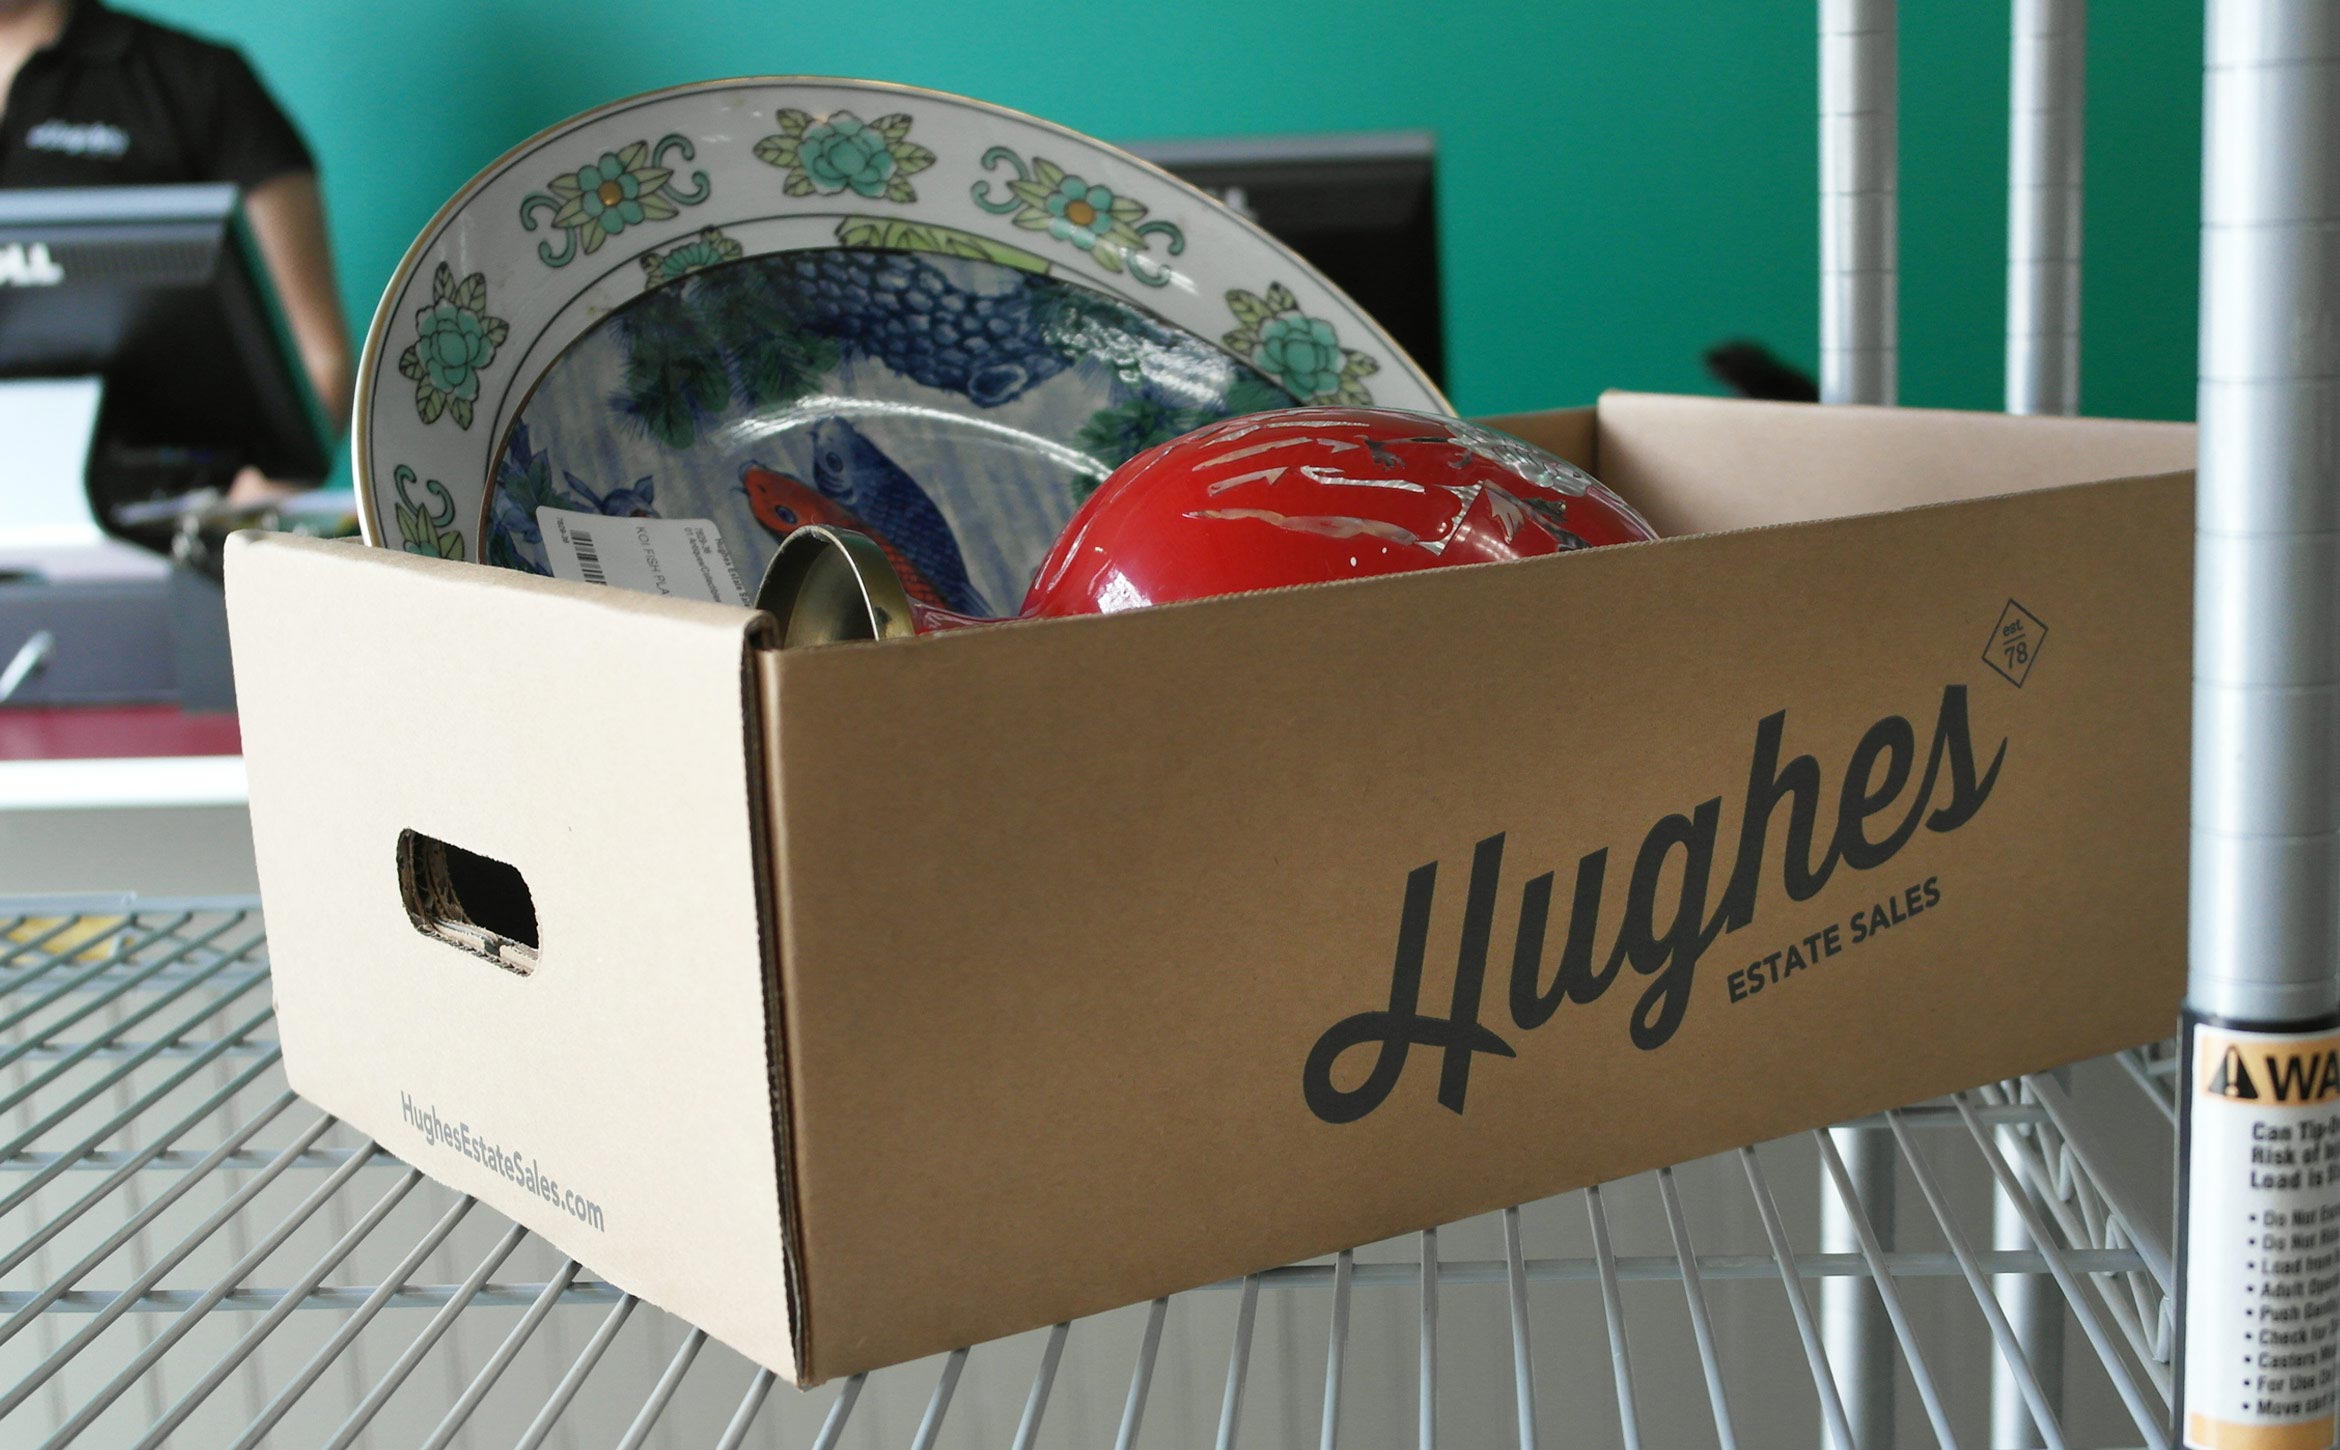 branded hughes estate sales box with dishes in it